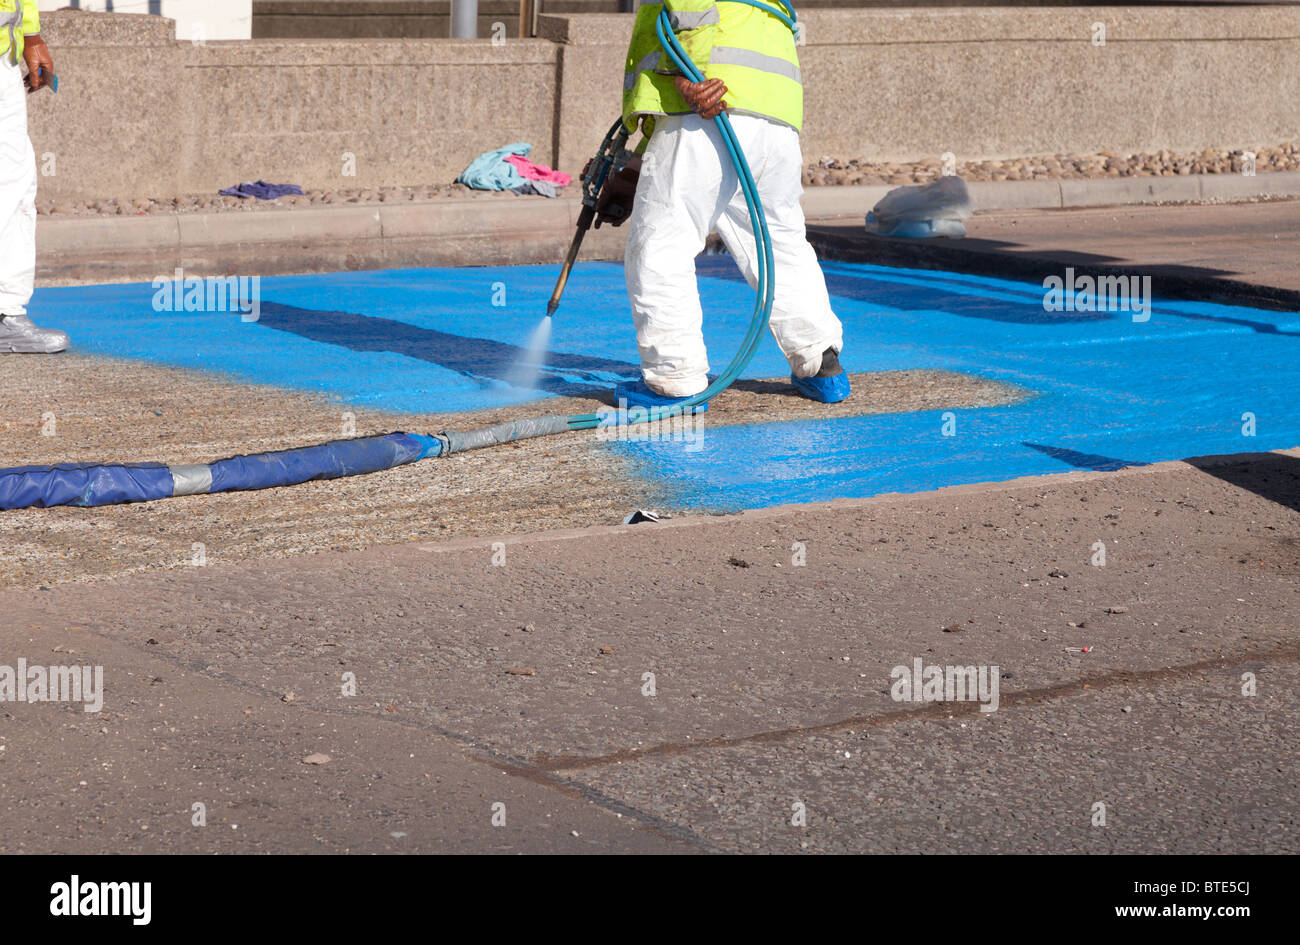 Image of a workforce team spraying a 2mm PVC membrane layer of a proprietory waterproofing spray during the road re-surfacing. Stock Photo